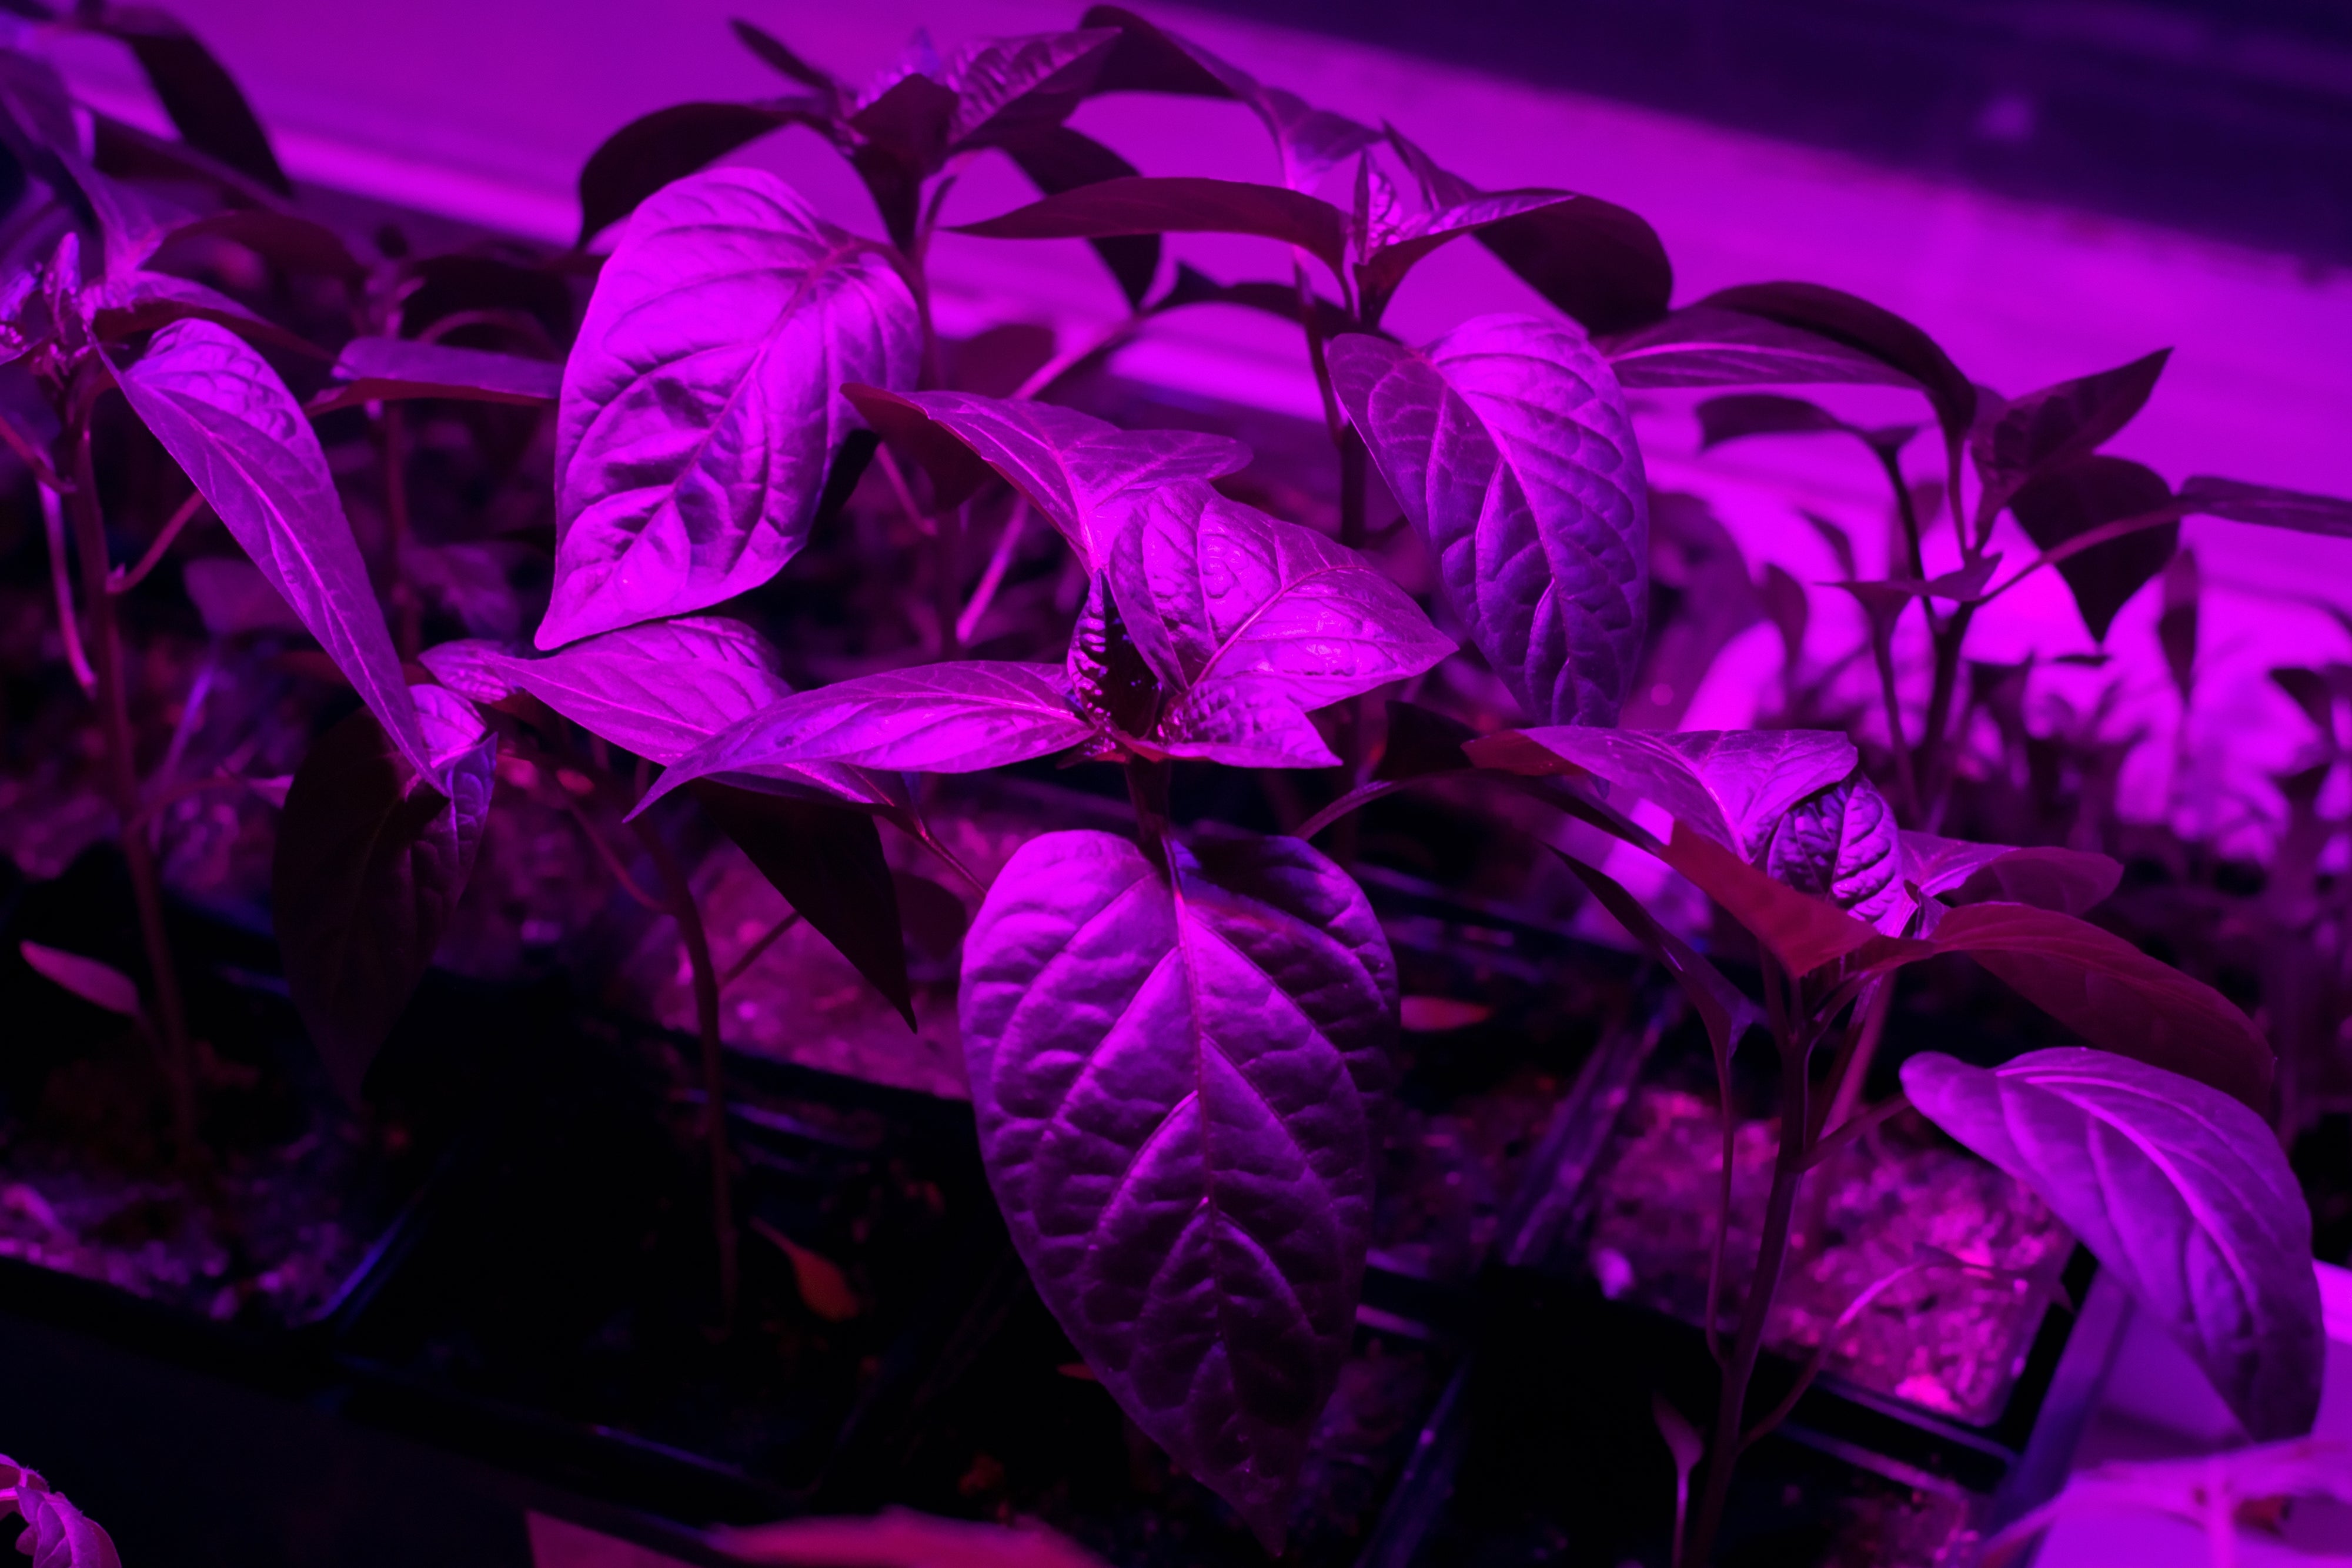 Using Ultraviolet Light as a Way to Control Powdery Mildew